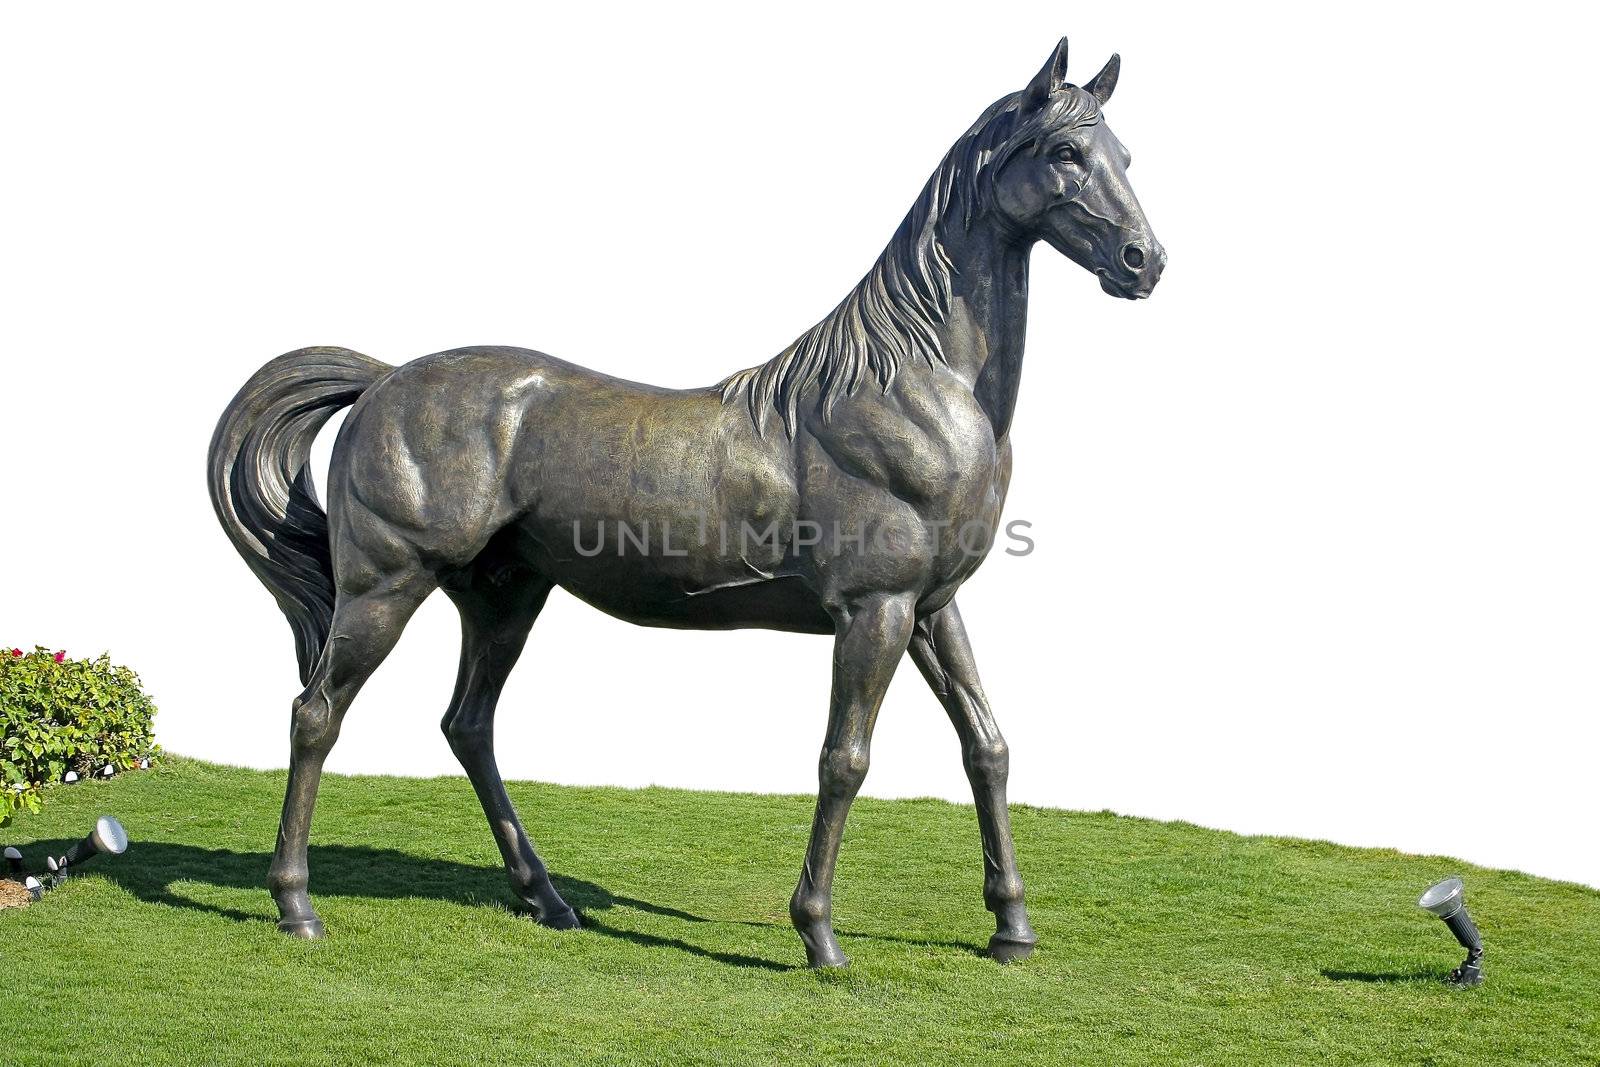 Sculpture of a horse on green grass, isolated on white background.